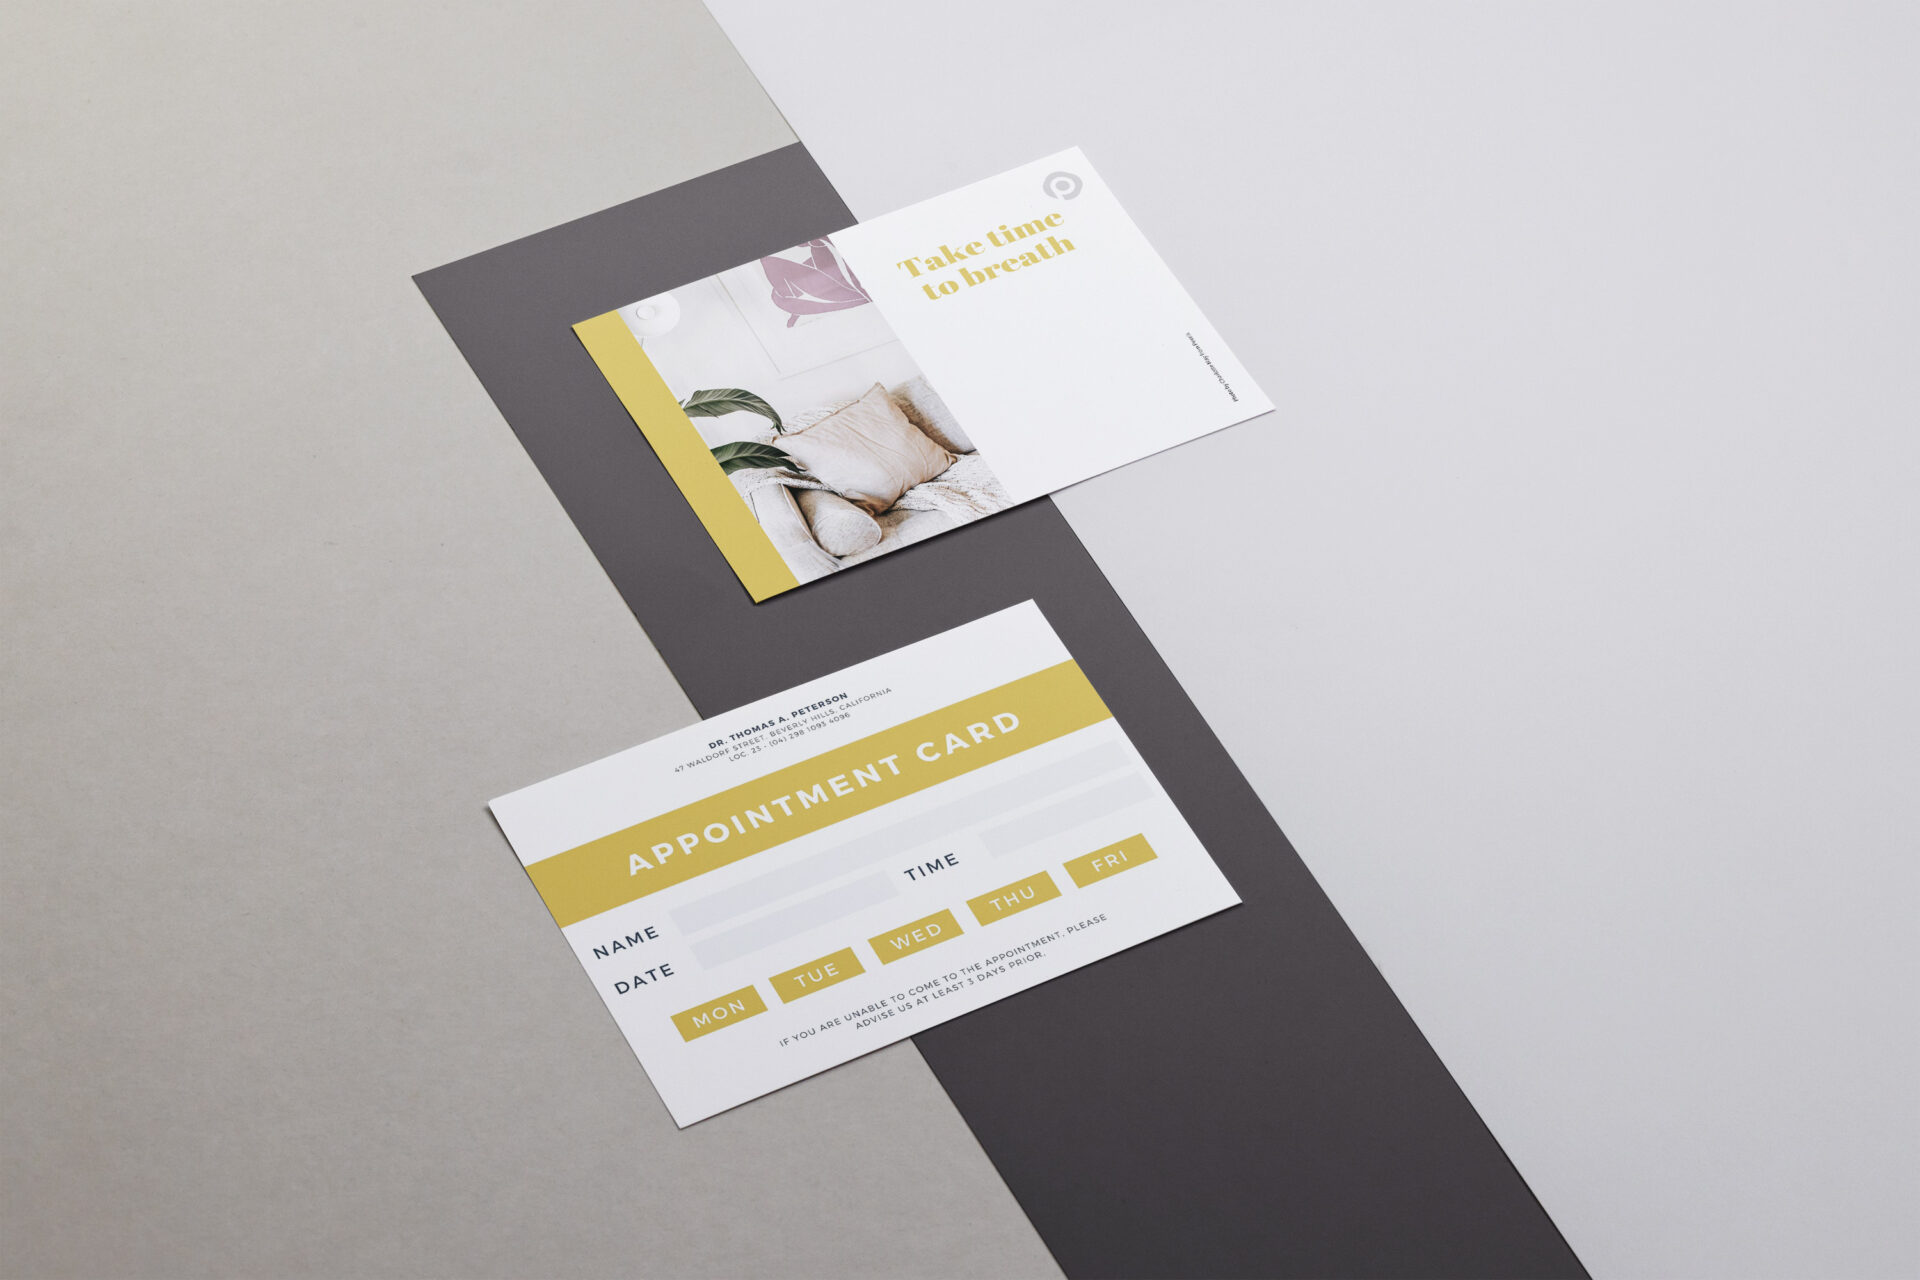 Appointment cards in Barcelona - Print with Pagerr